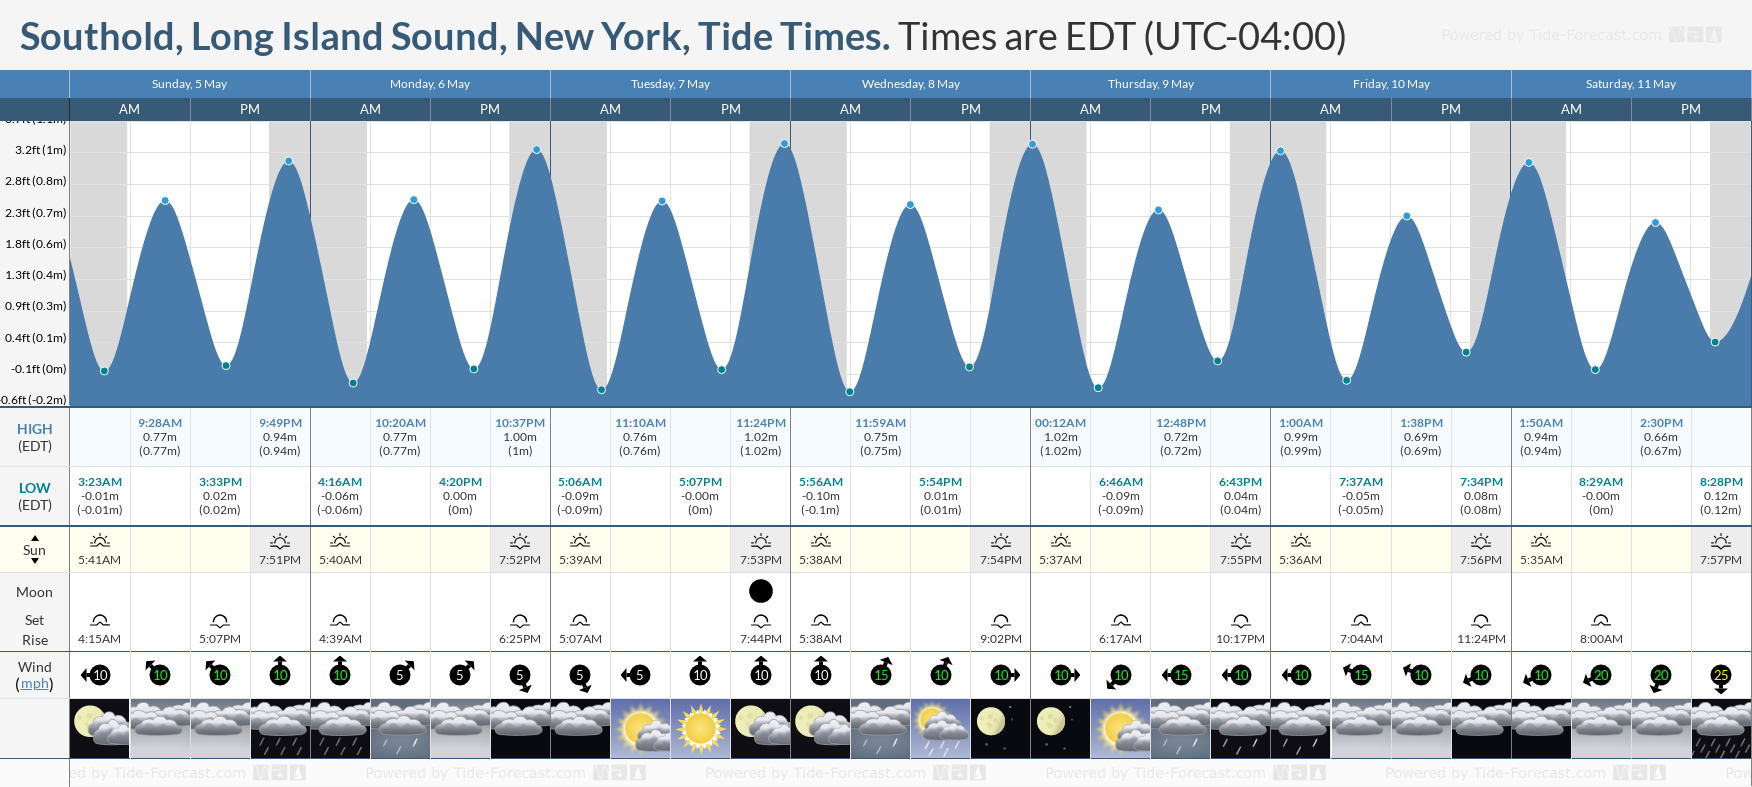 Southold, Long Island Sound, New York Tide Chart including high and low tide tide times for the next 7 days